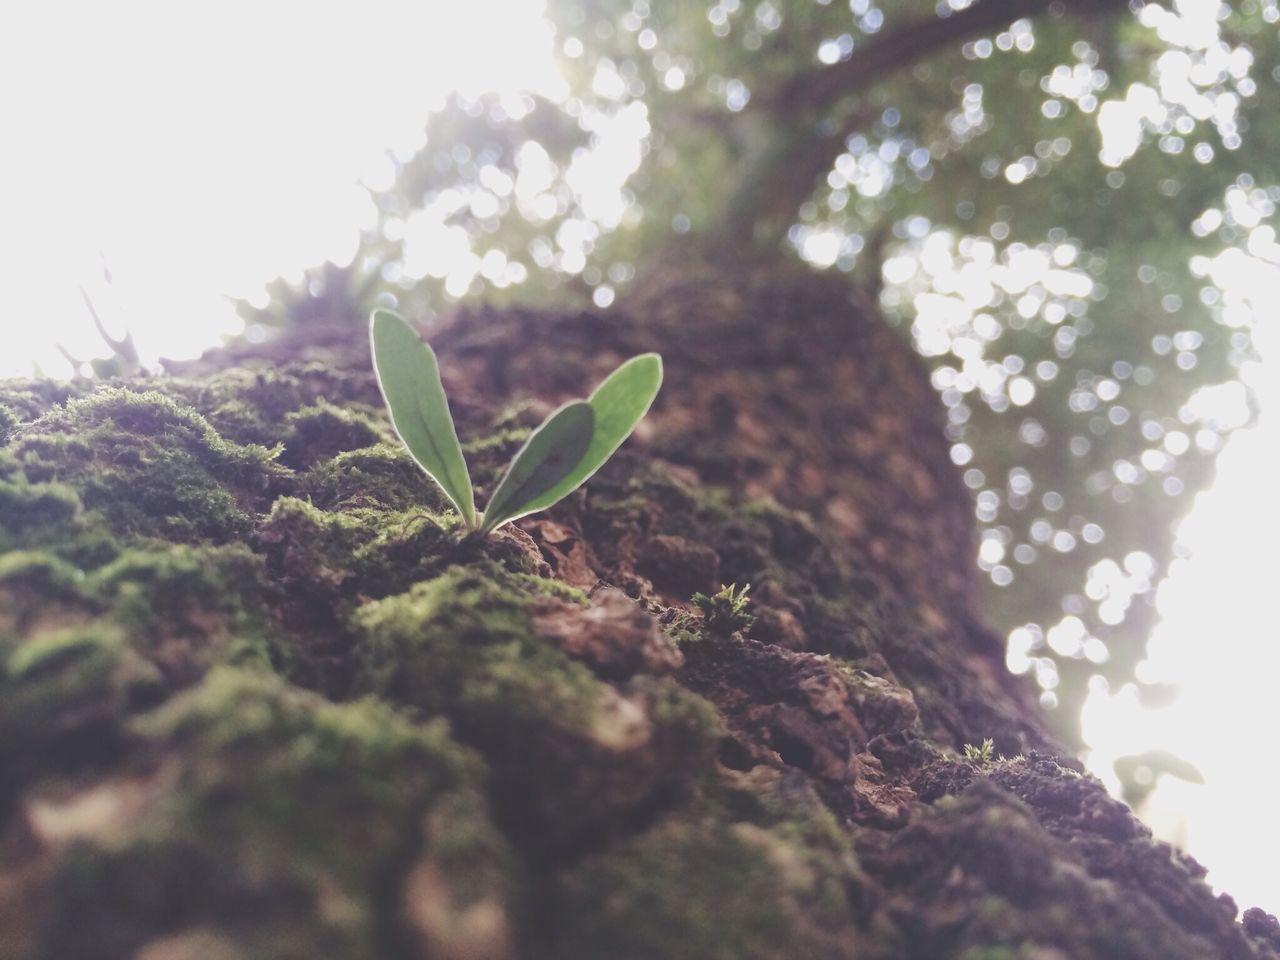 tree, growth, low angle view, branch, leaf, nature, focus on foreground, tranquility, sunlight, close-up, tree trunk, green color, sky, beauty in nature, selective focus, day, outdoors, no people, forest, plant